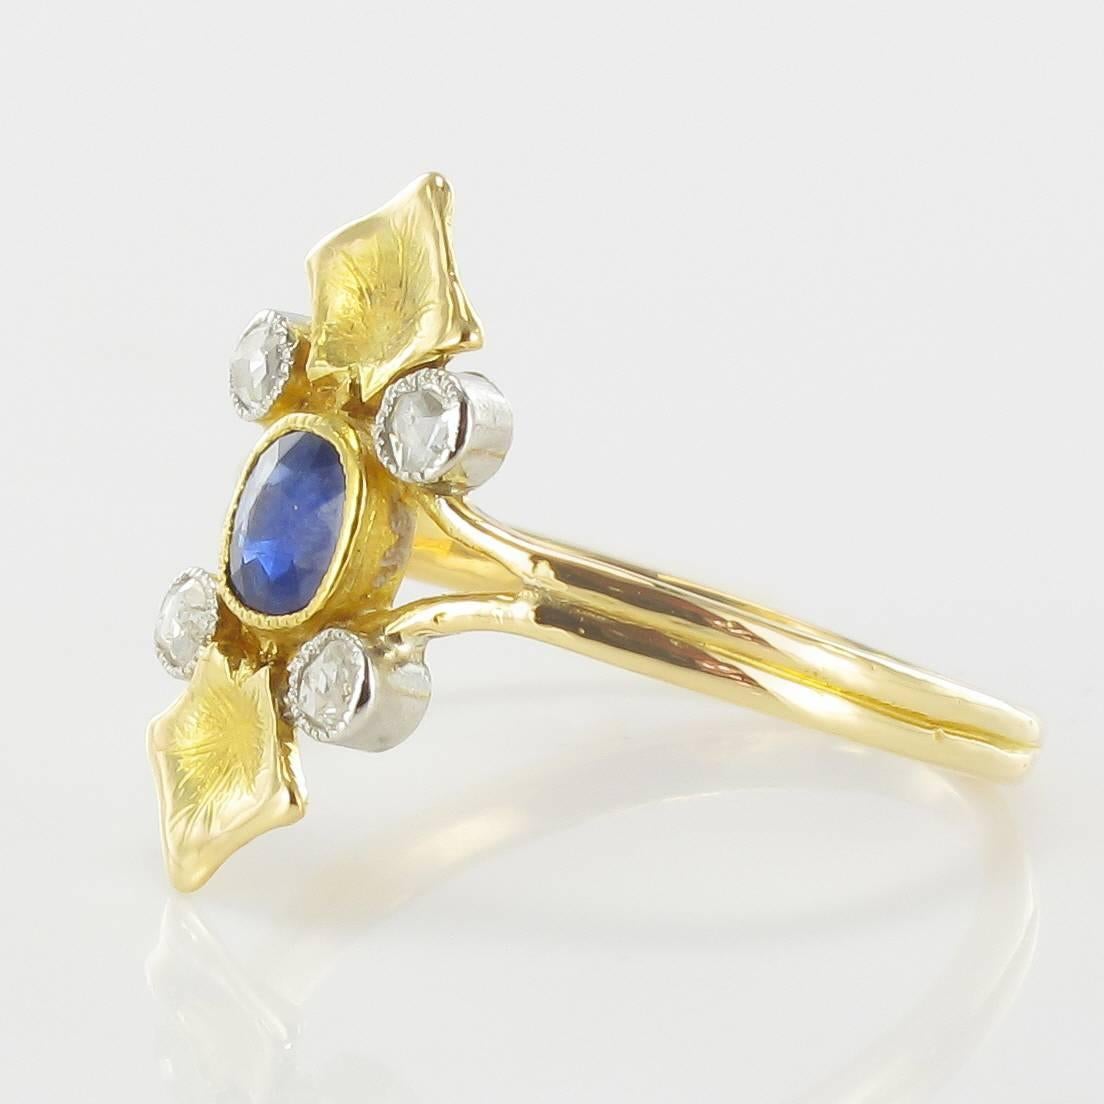 Ring in 18 carat yellow gold, eagle head hallmark. 

This gorgeous antique ring is bezel set with an oval sapphire with a beaded surround with 4 brilliant cut diamonds bezel set at its cardinal points also in beaded settings. Two finely engraved